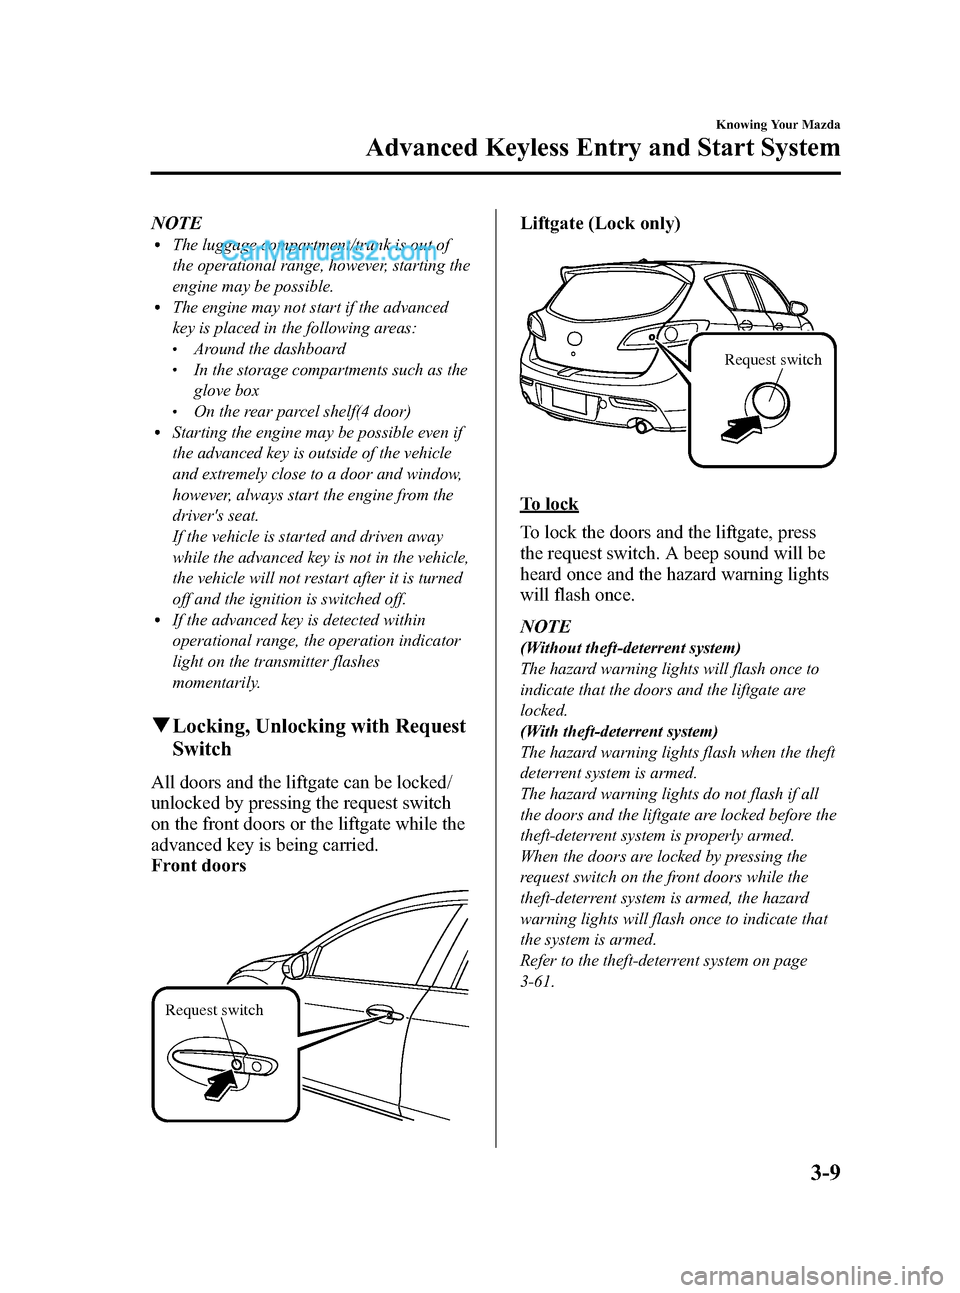 MAZDA MODEL MAZDASPEED 3 2012  Owners Manual (in English) Black plate (85,1)
NOTElThe luggage compartment/trunk is out of
the operational range, however, starting the
engine may be possible.
lThe engine may not start if the advanced
key is placed in the foll